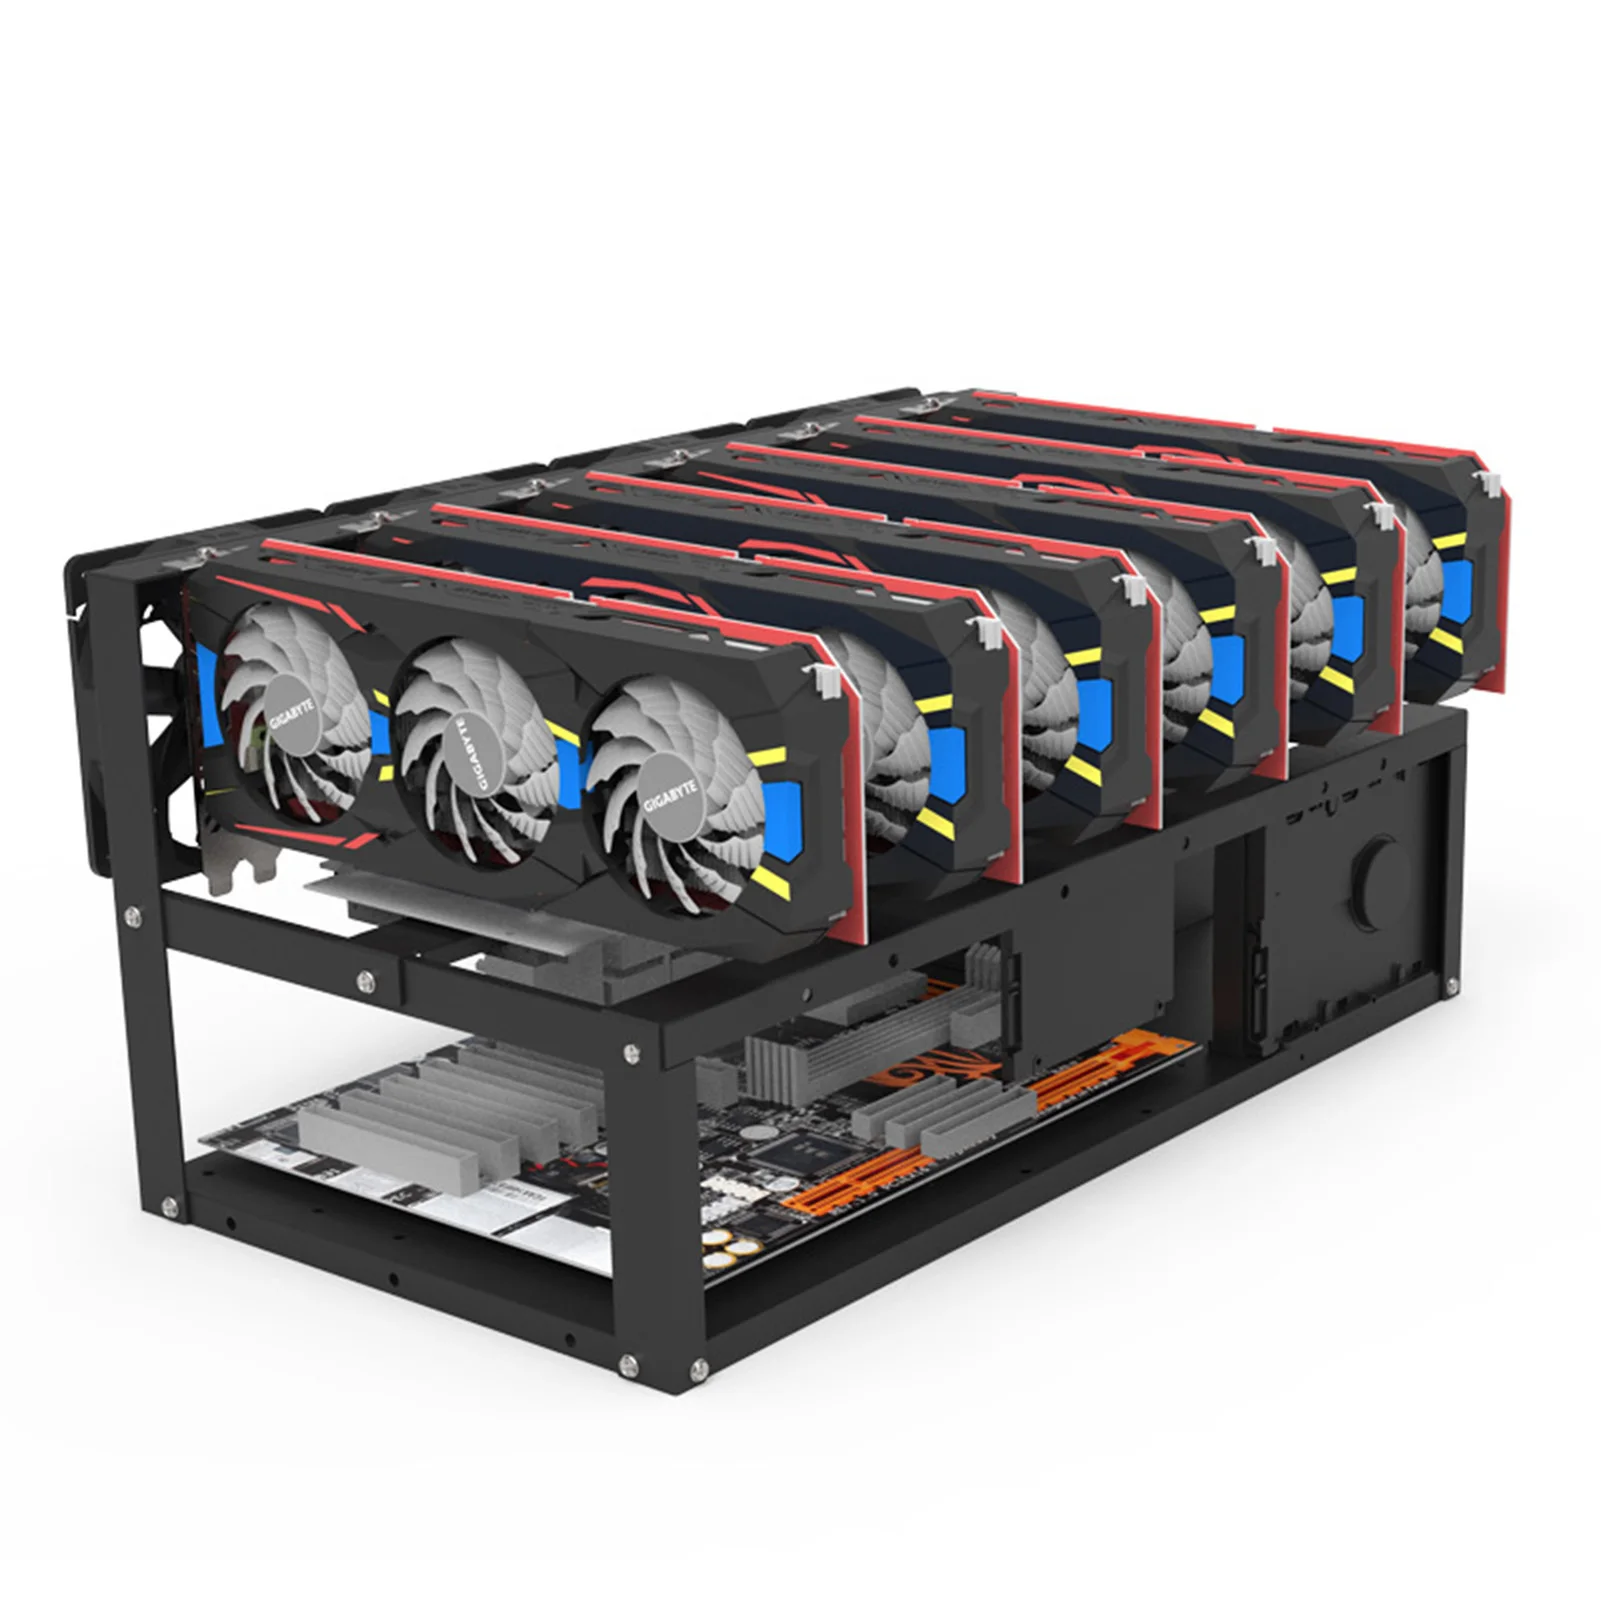 6 gpu slots stand durable open mining rig frame case durable open mining rig frame case stackable miner computer rack free global shipping